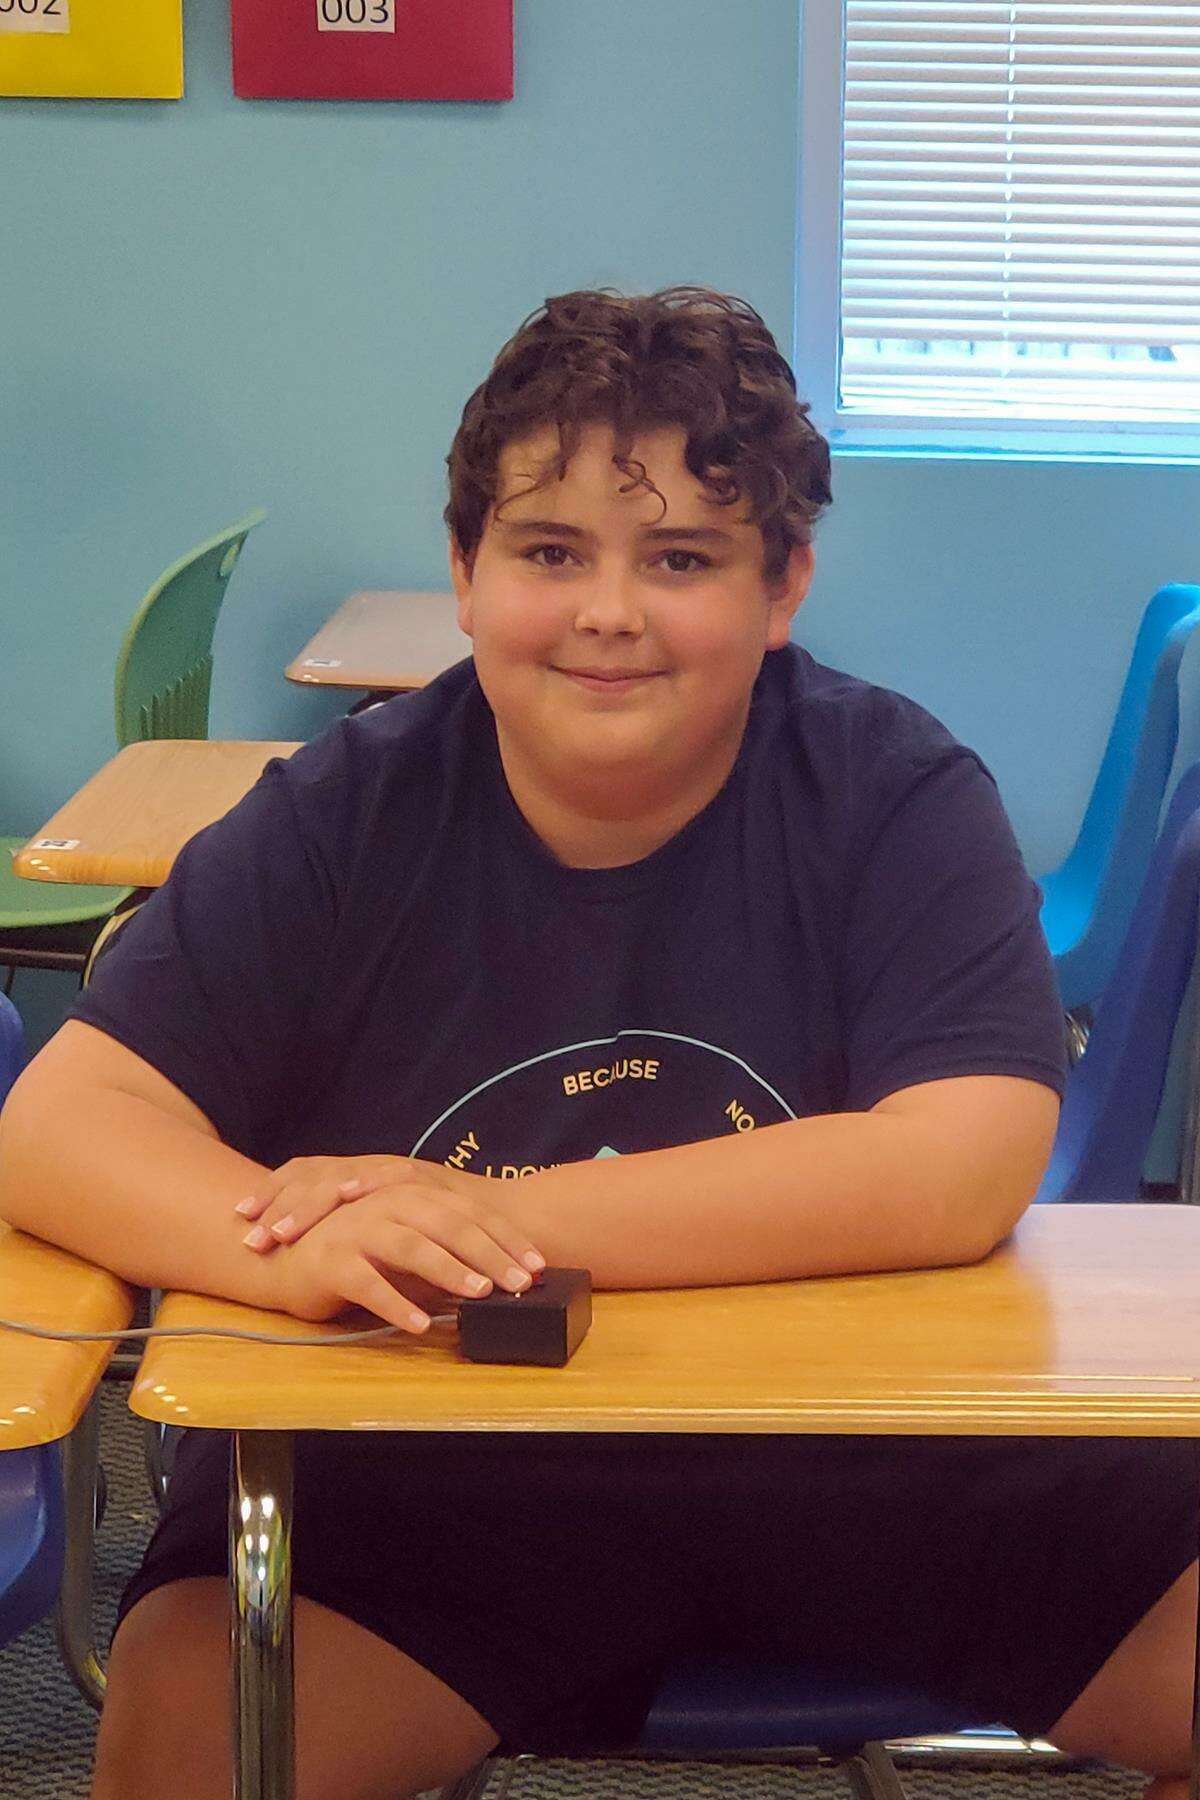 Hamilton Middle School eighth grade student Rex Esch placed third in the Houston Regional Finals of the National History Bee and qualified for the 2022 Middle School National Championships, to be held June 17-20 in Orlando, Fla.